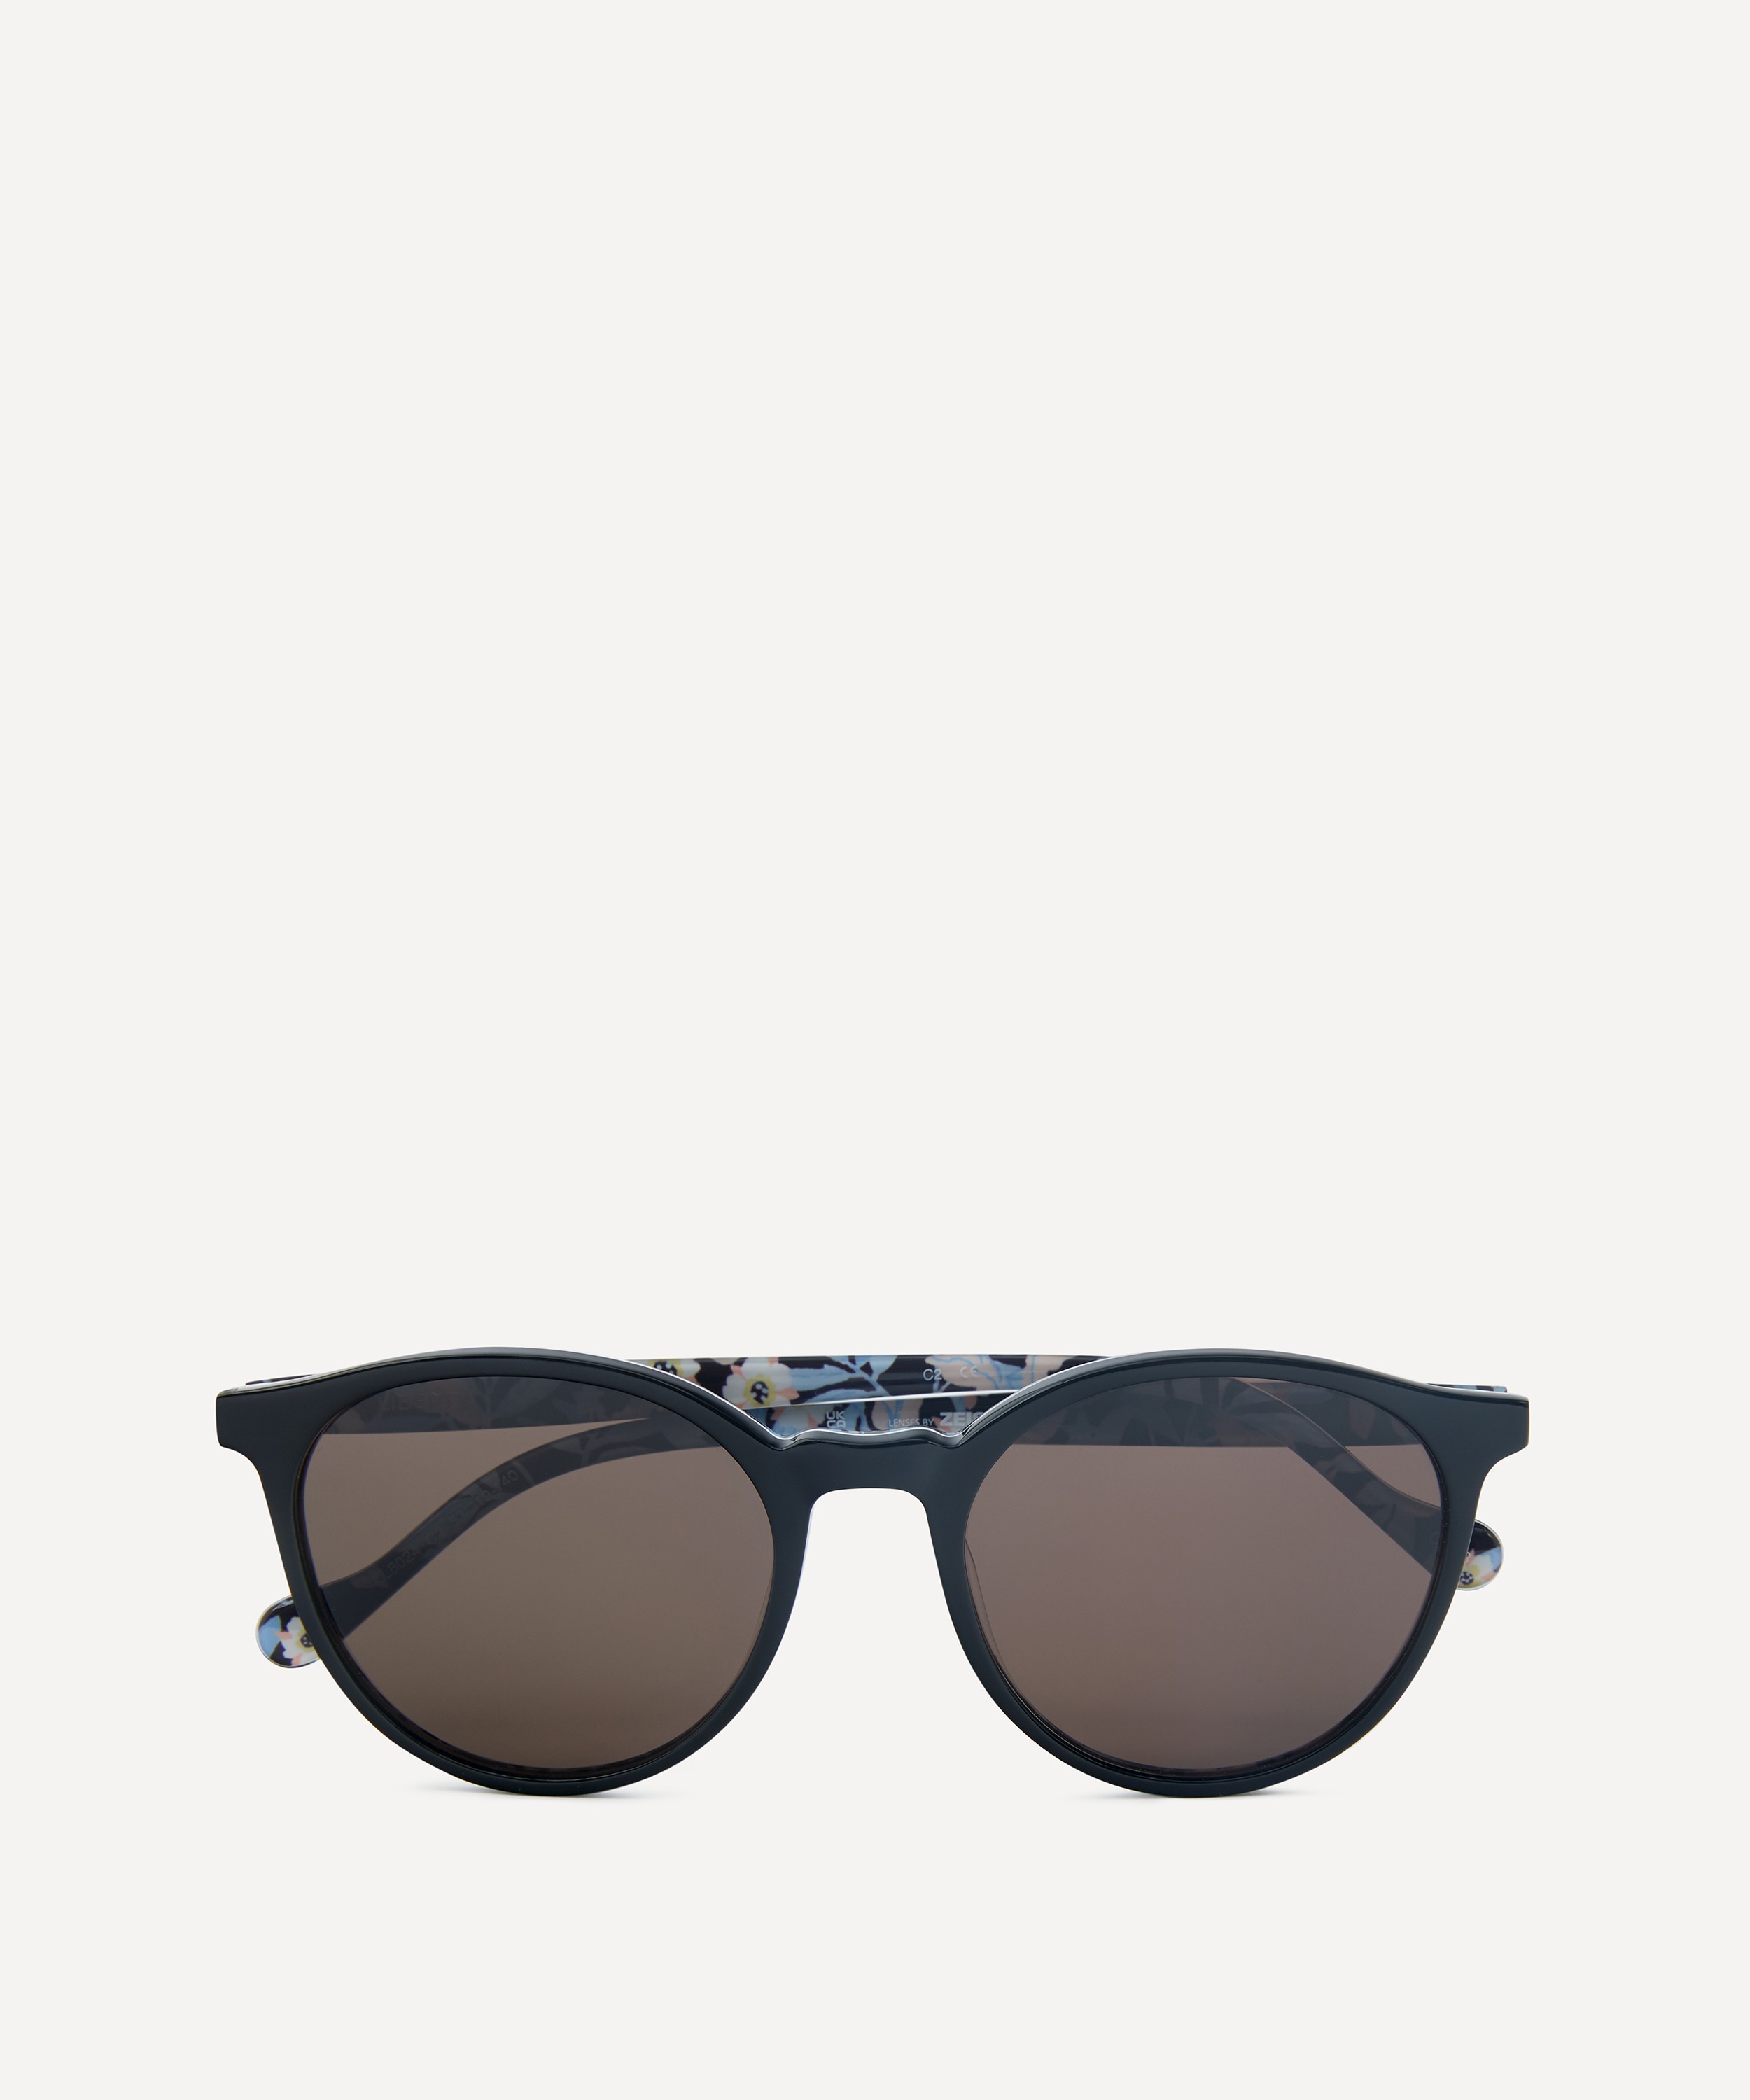 Liberty - Black With Print Round Sunglasses image number 3